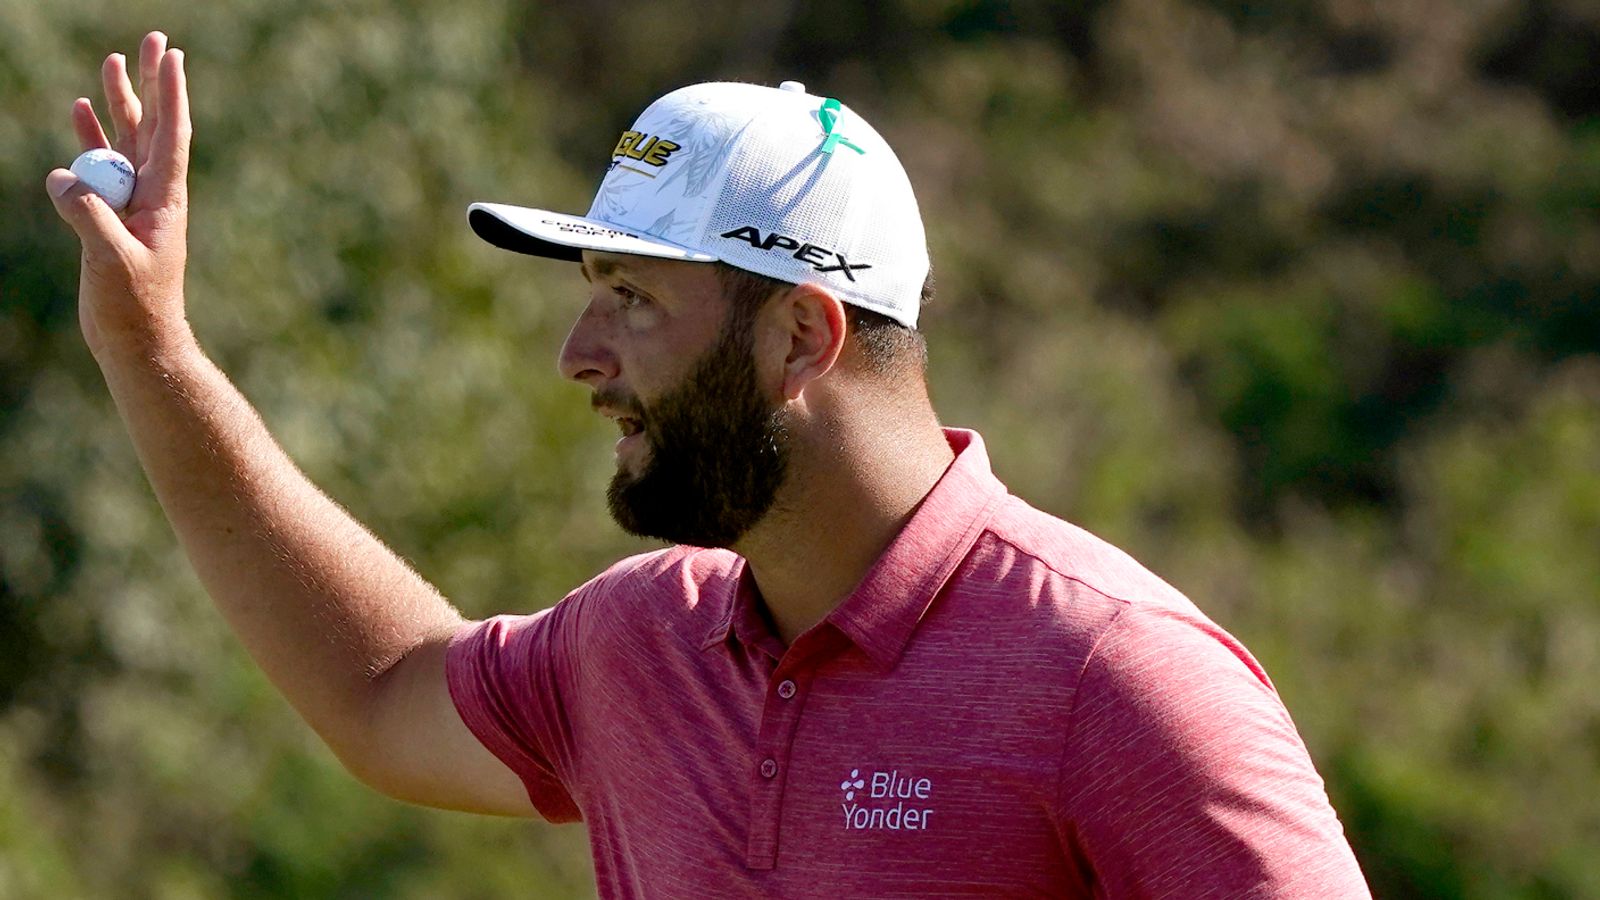 Jon Rahm calls on joint PGA-DP World Tour decision on LIV players ahead of Ryder Cup